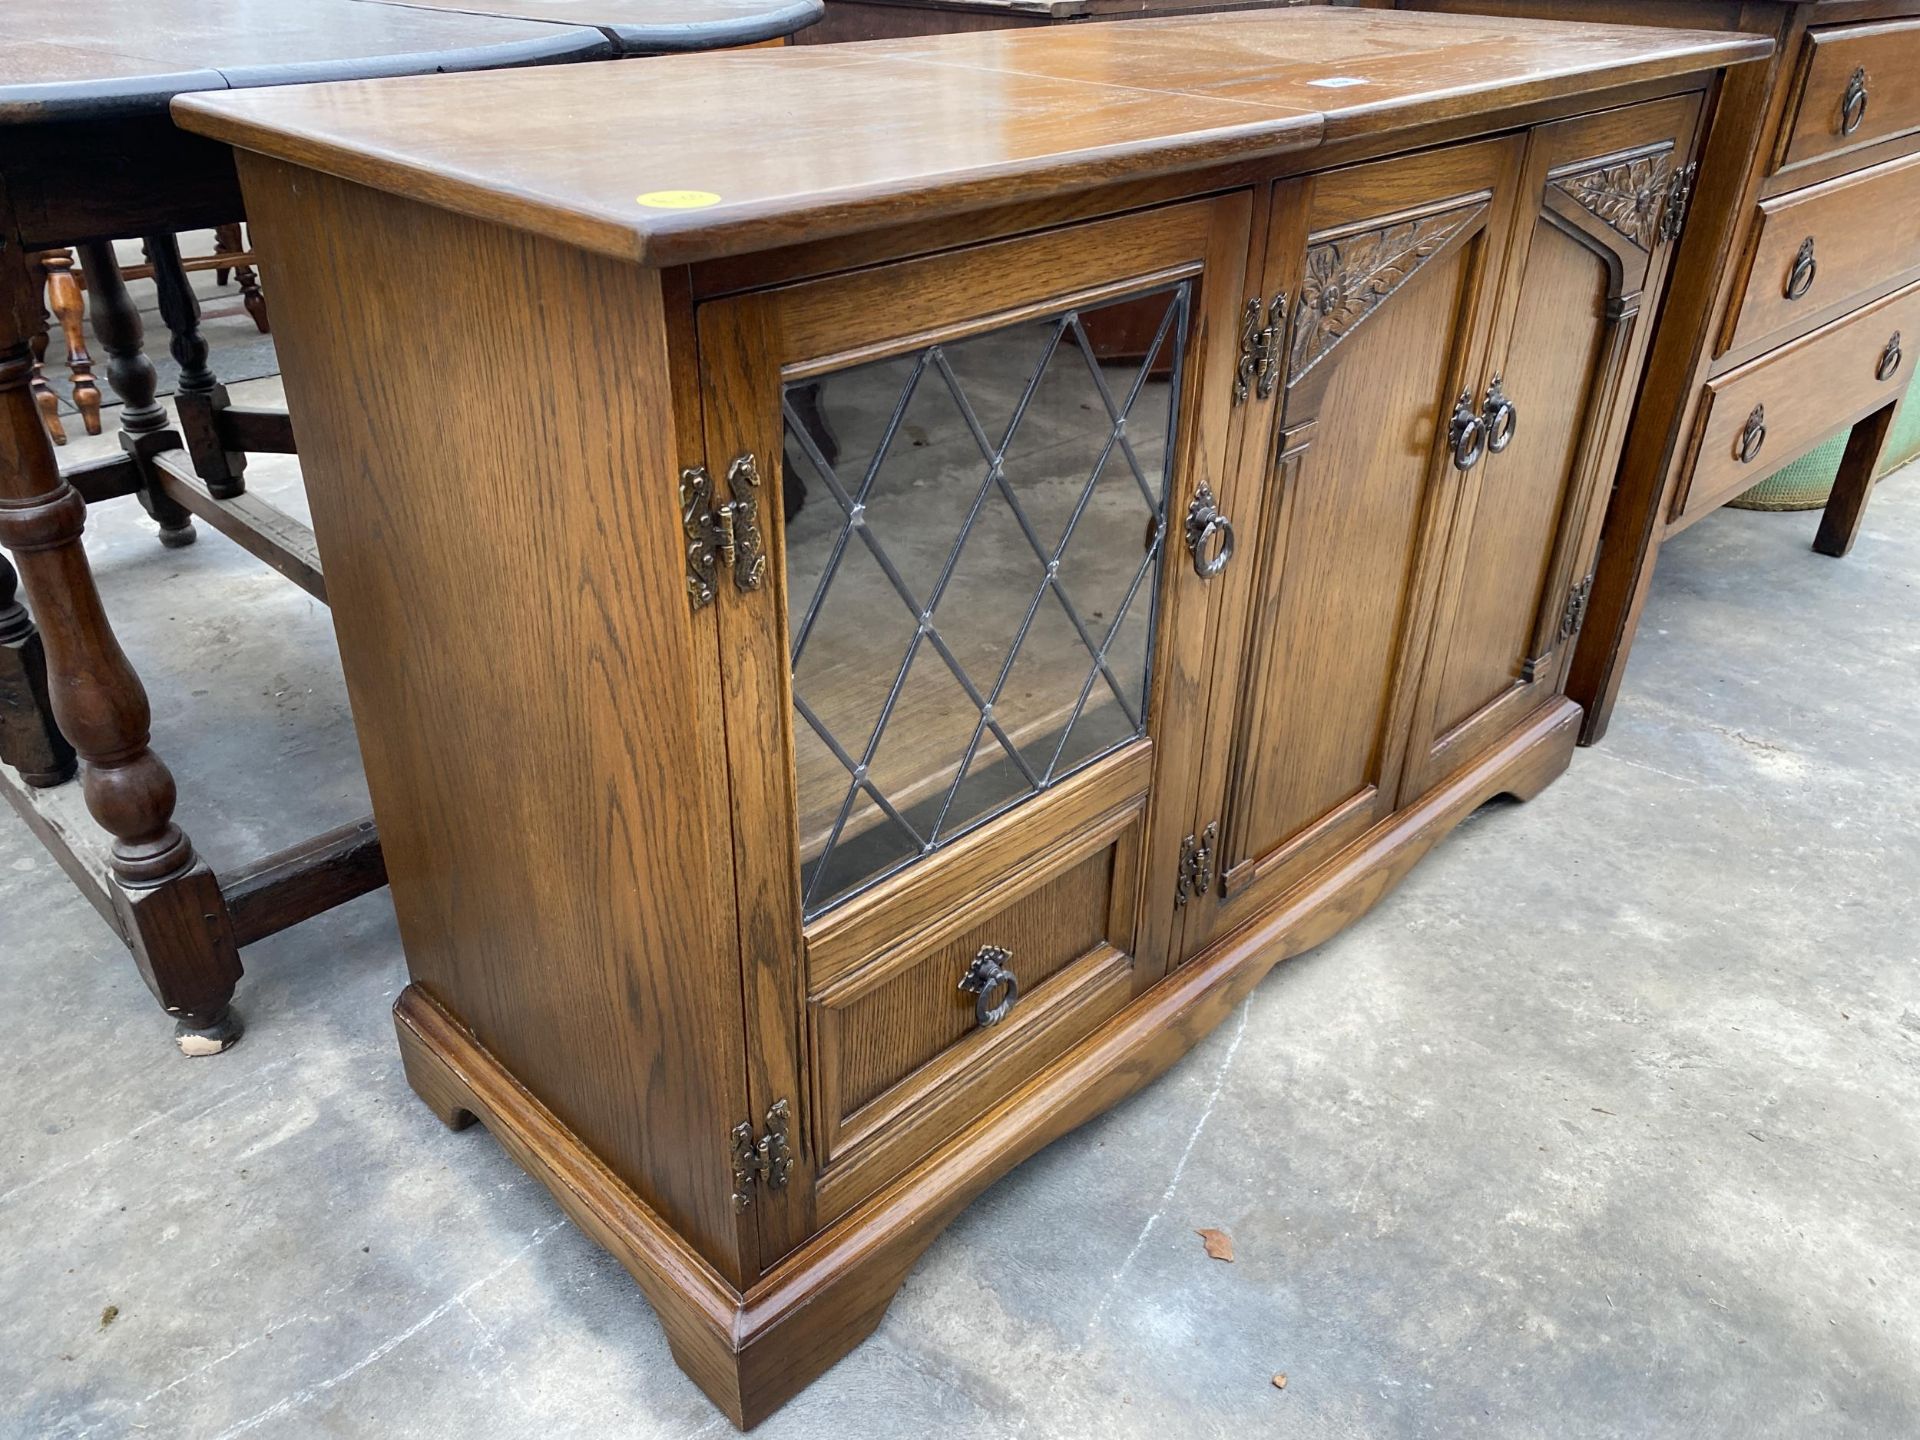 AN OAK GLAZED AND LEADED OLD CHARM STYLE HI-FI CABINET, 45" WIDE - Image 2 of 3